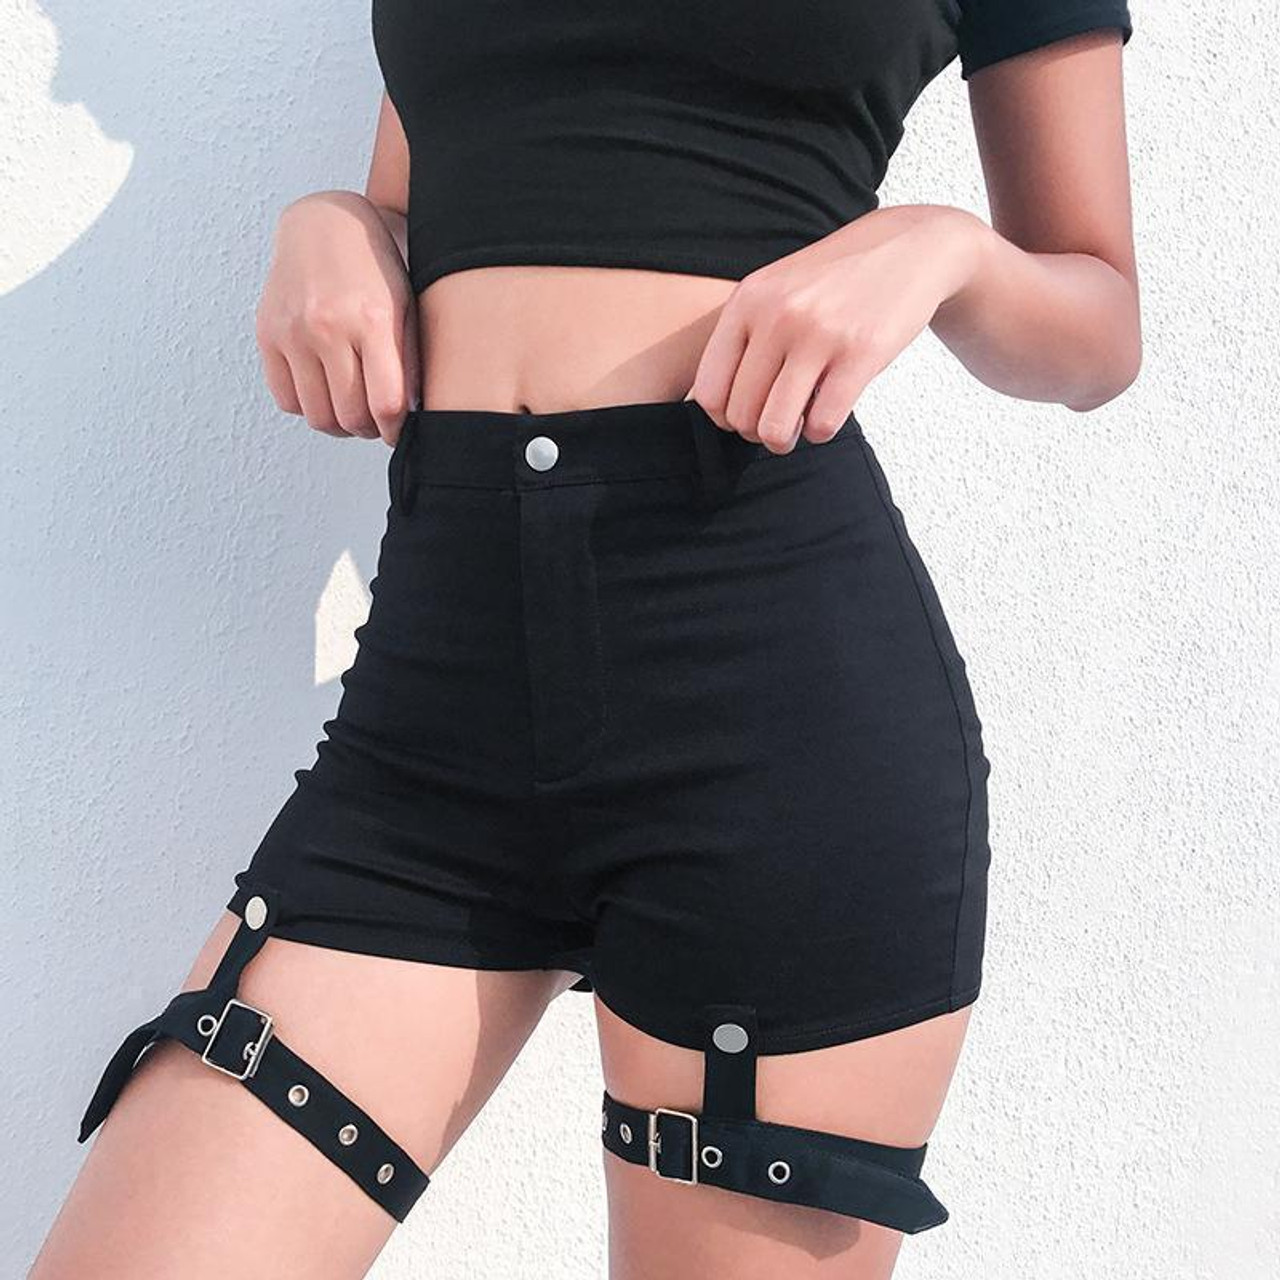 Knix XXL hitouch high rise solid black short